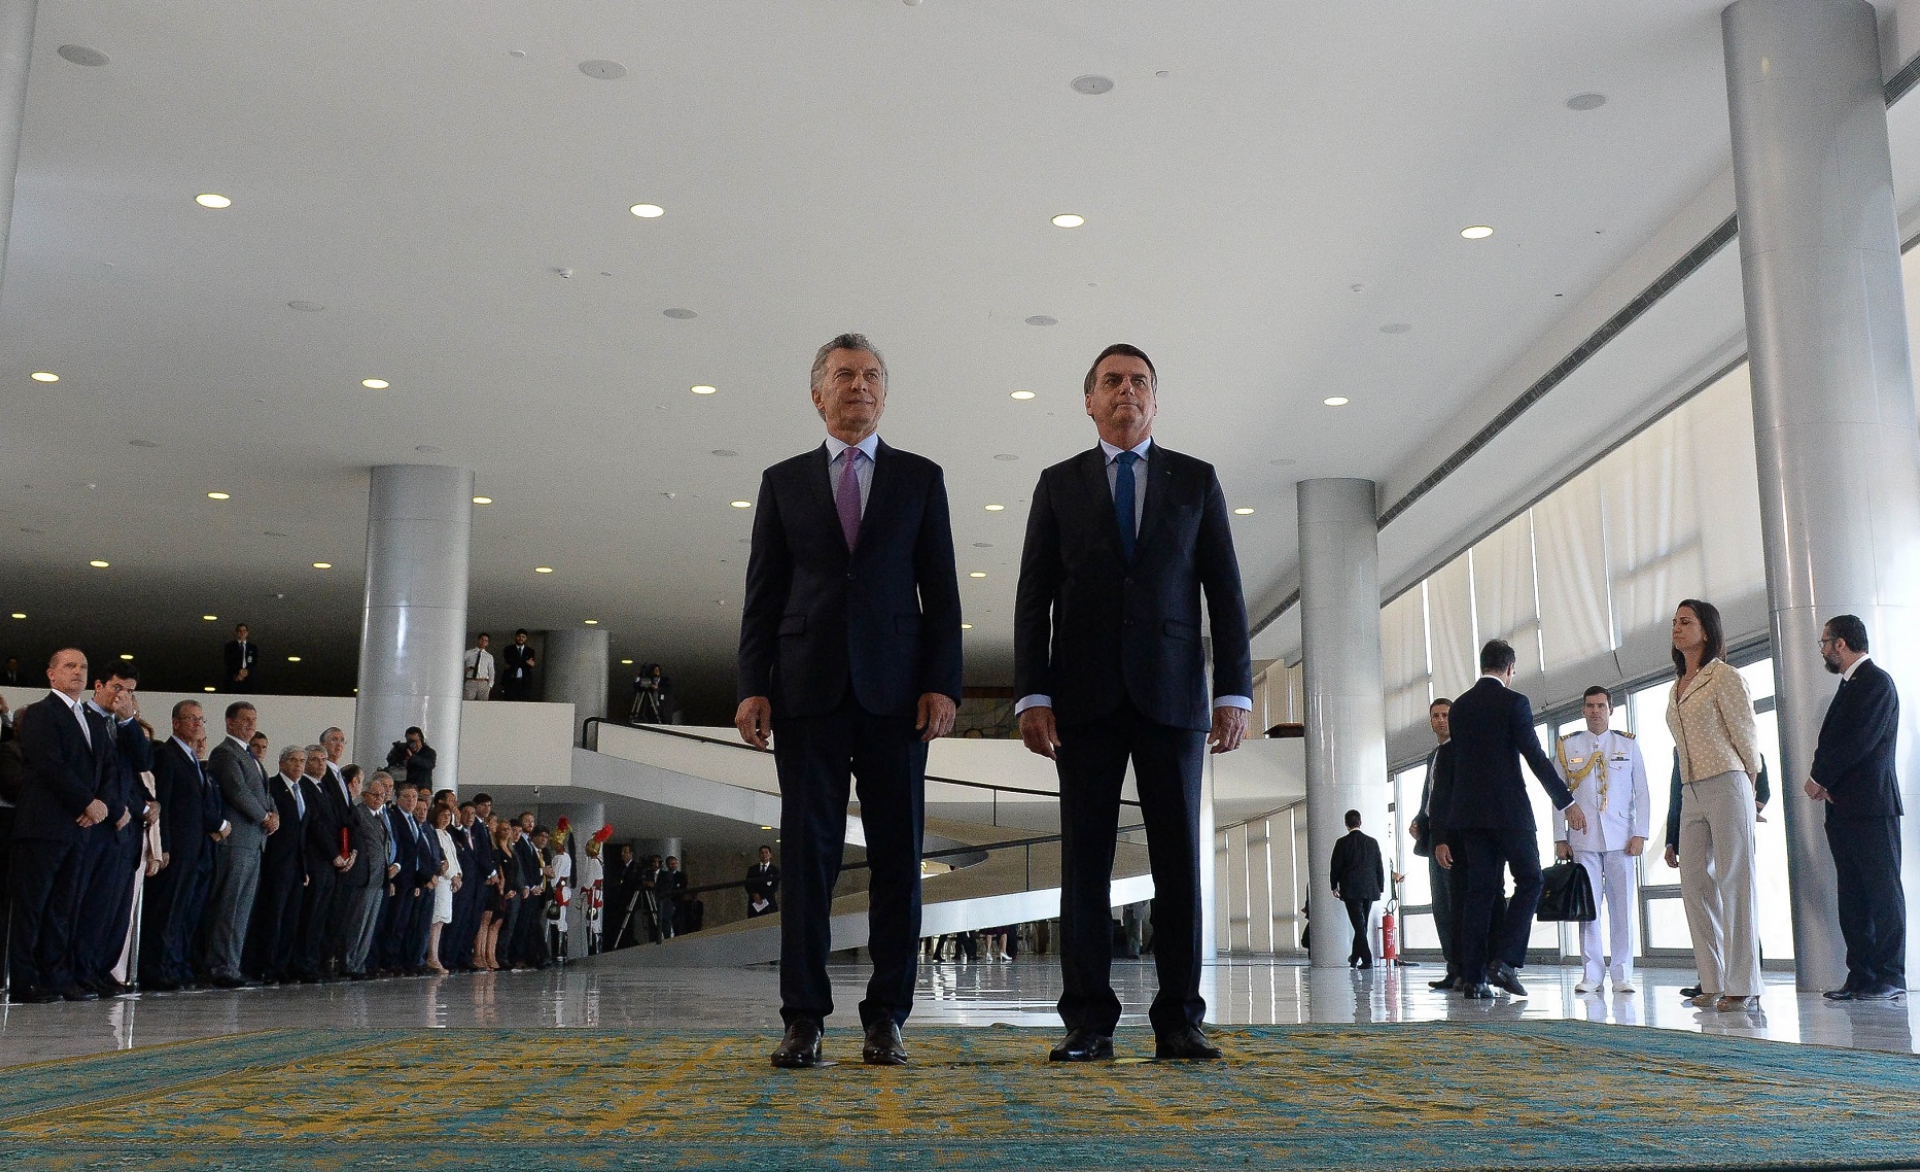 Presidents Macri and Bolsonaro agree to strengthen bilateral cooperation between Argentina and Brazil